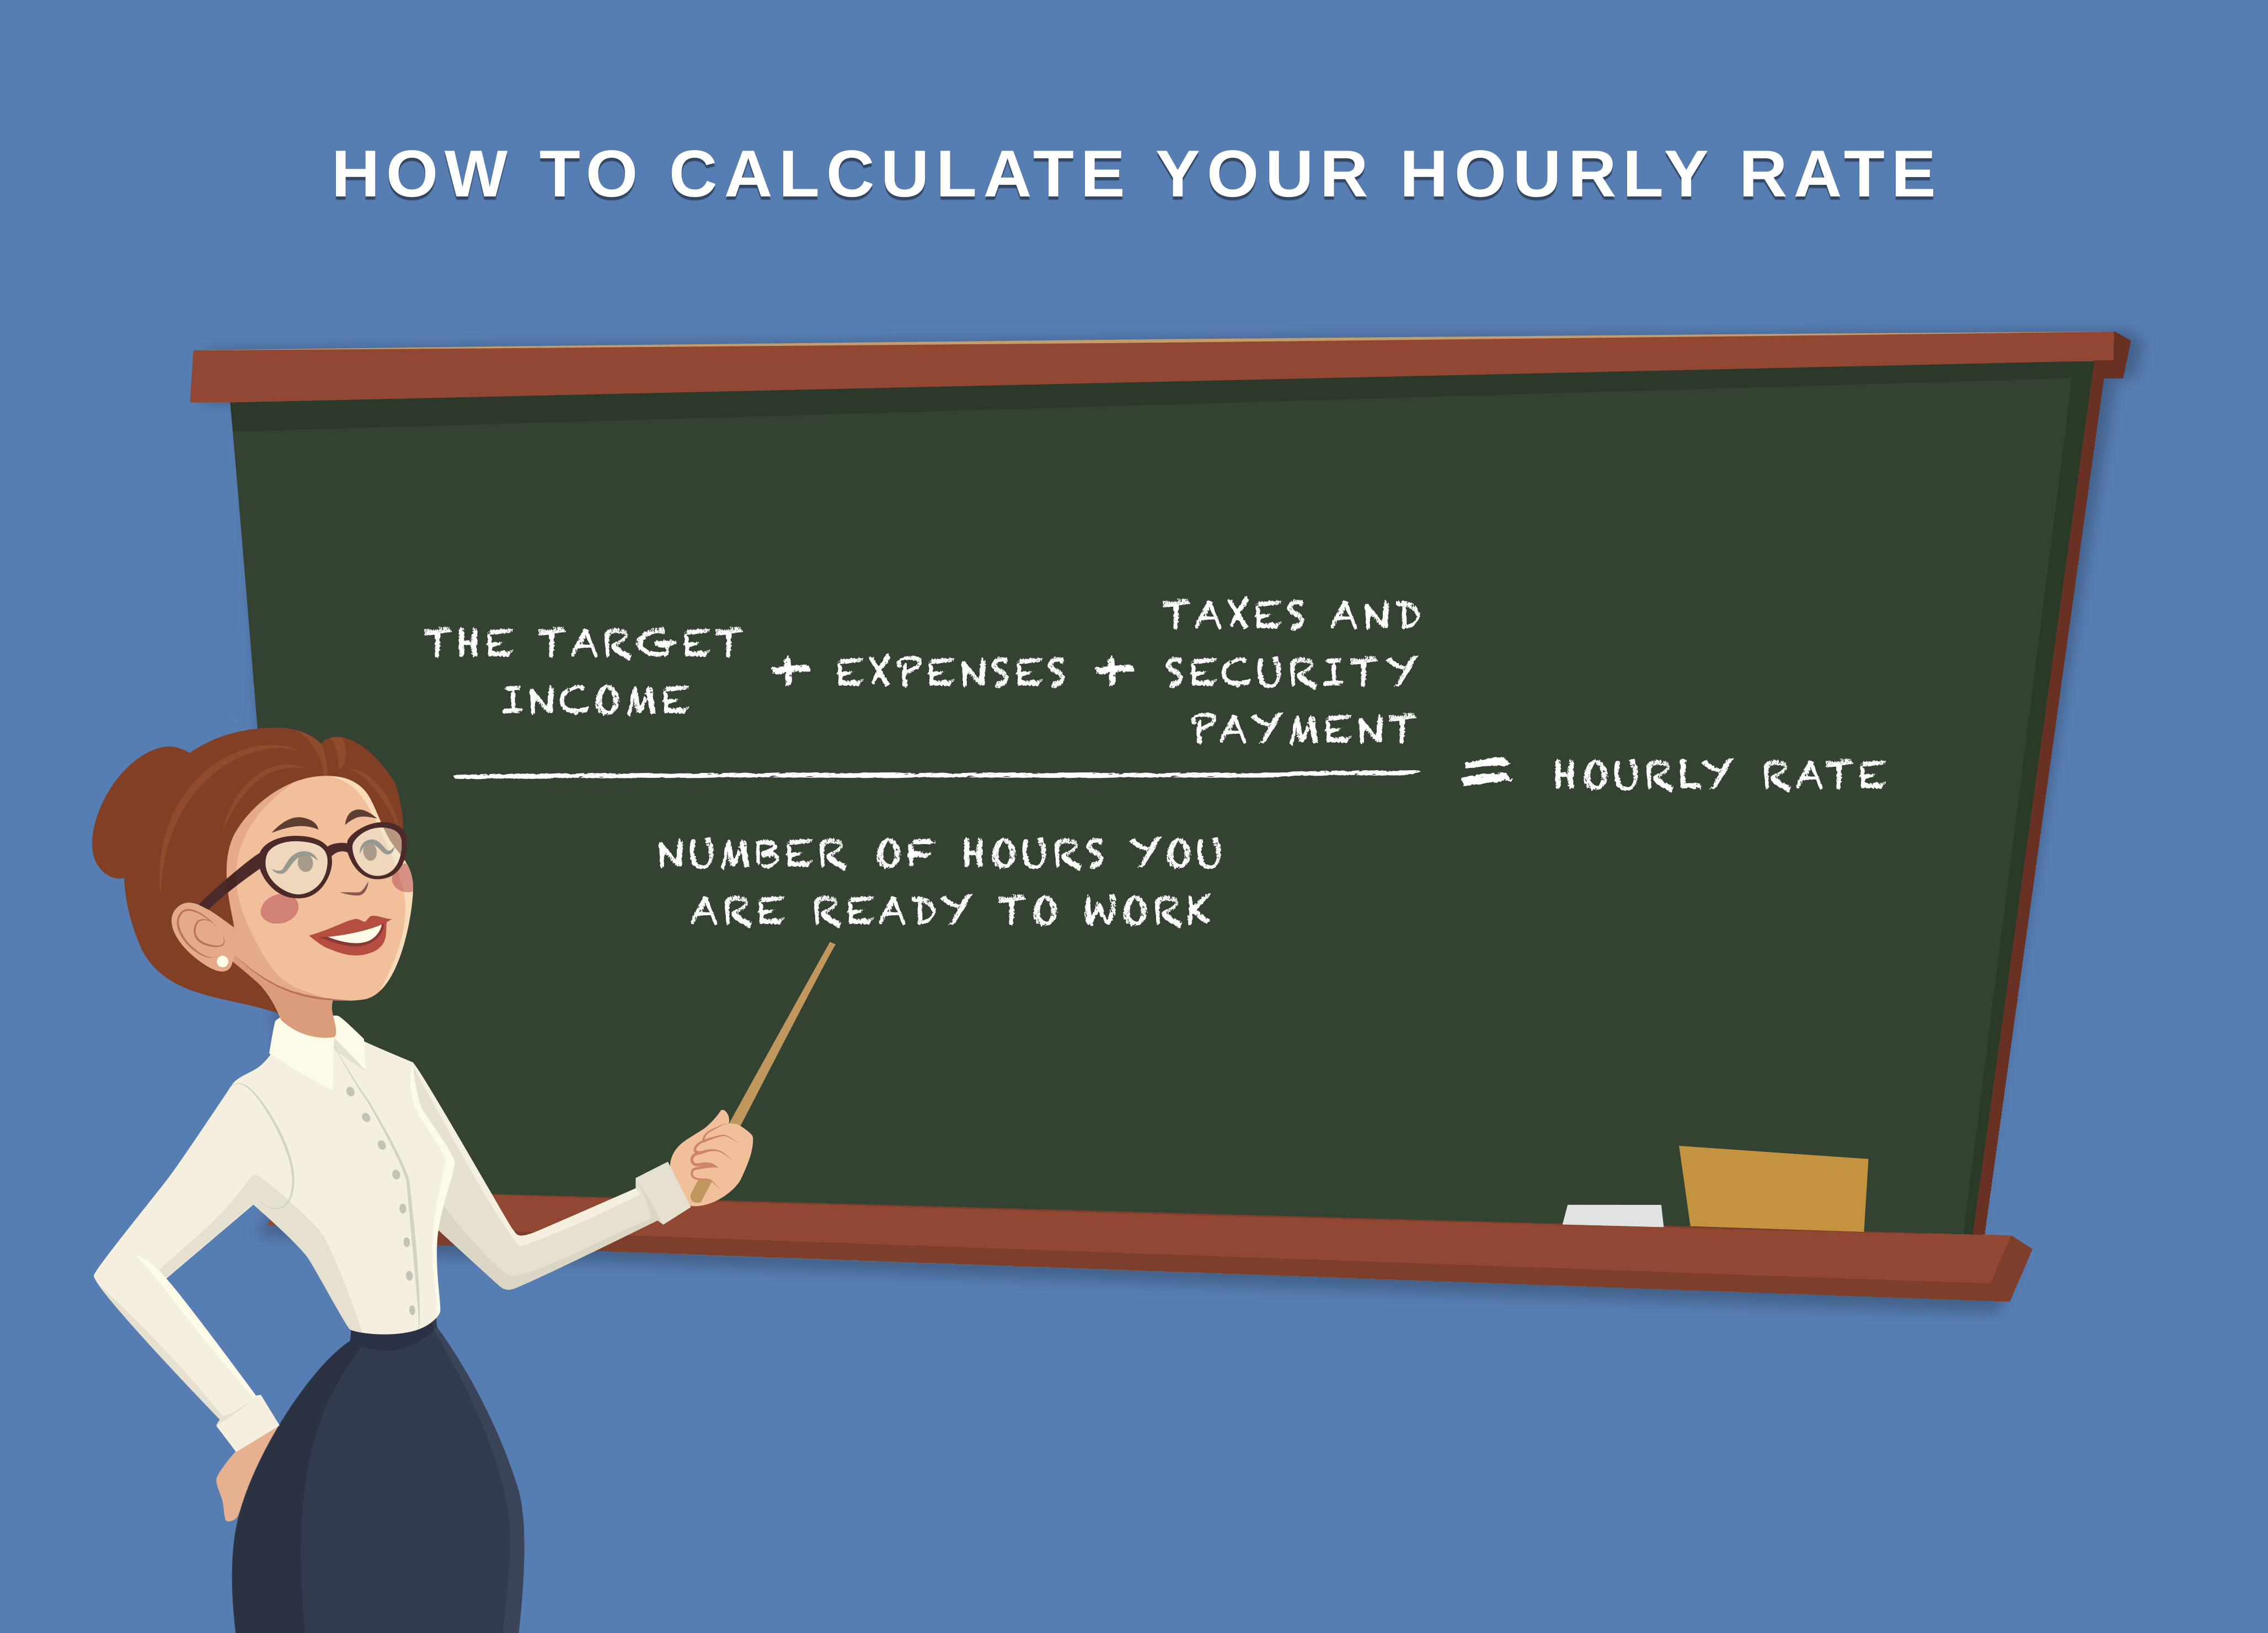 How to Calculate Your Hourly Rate